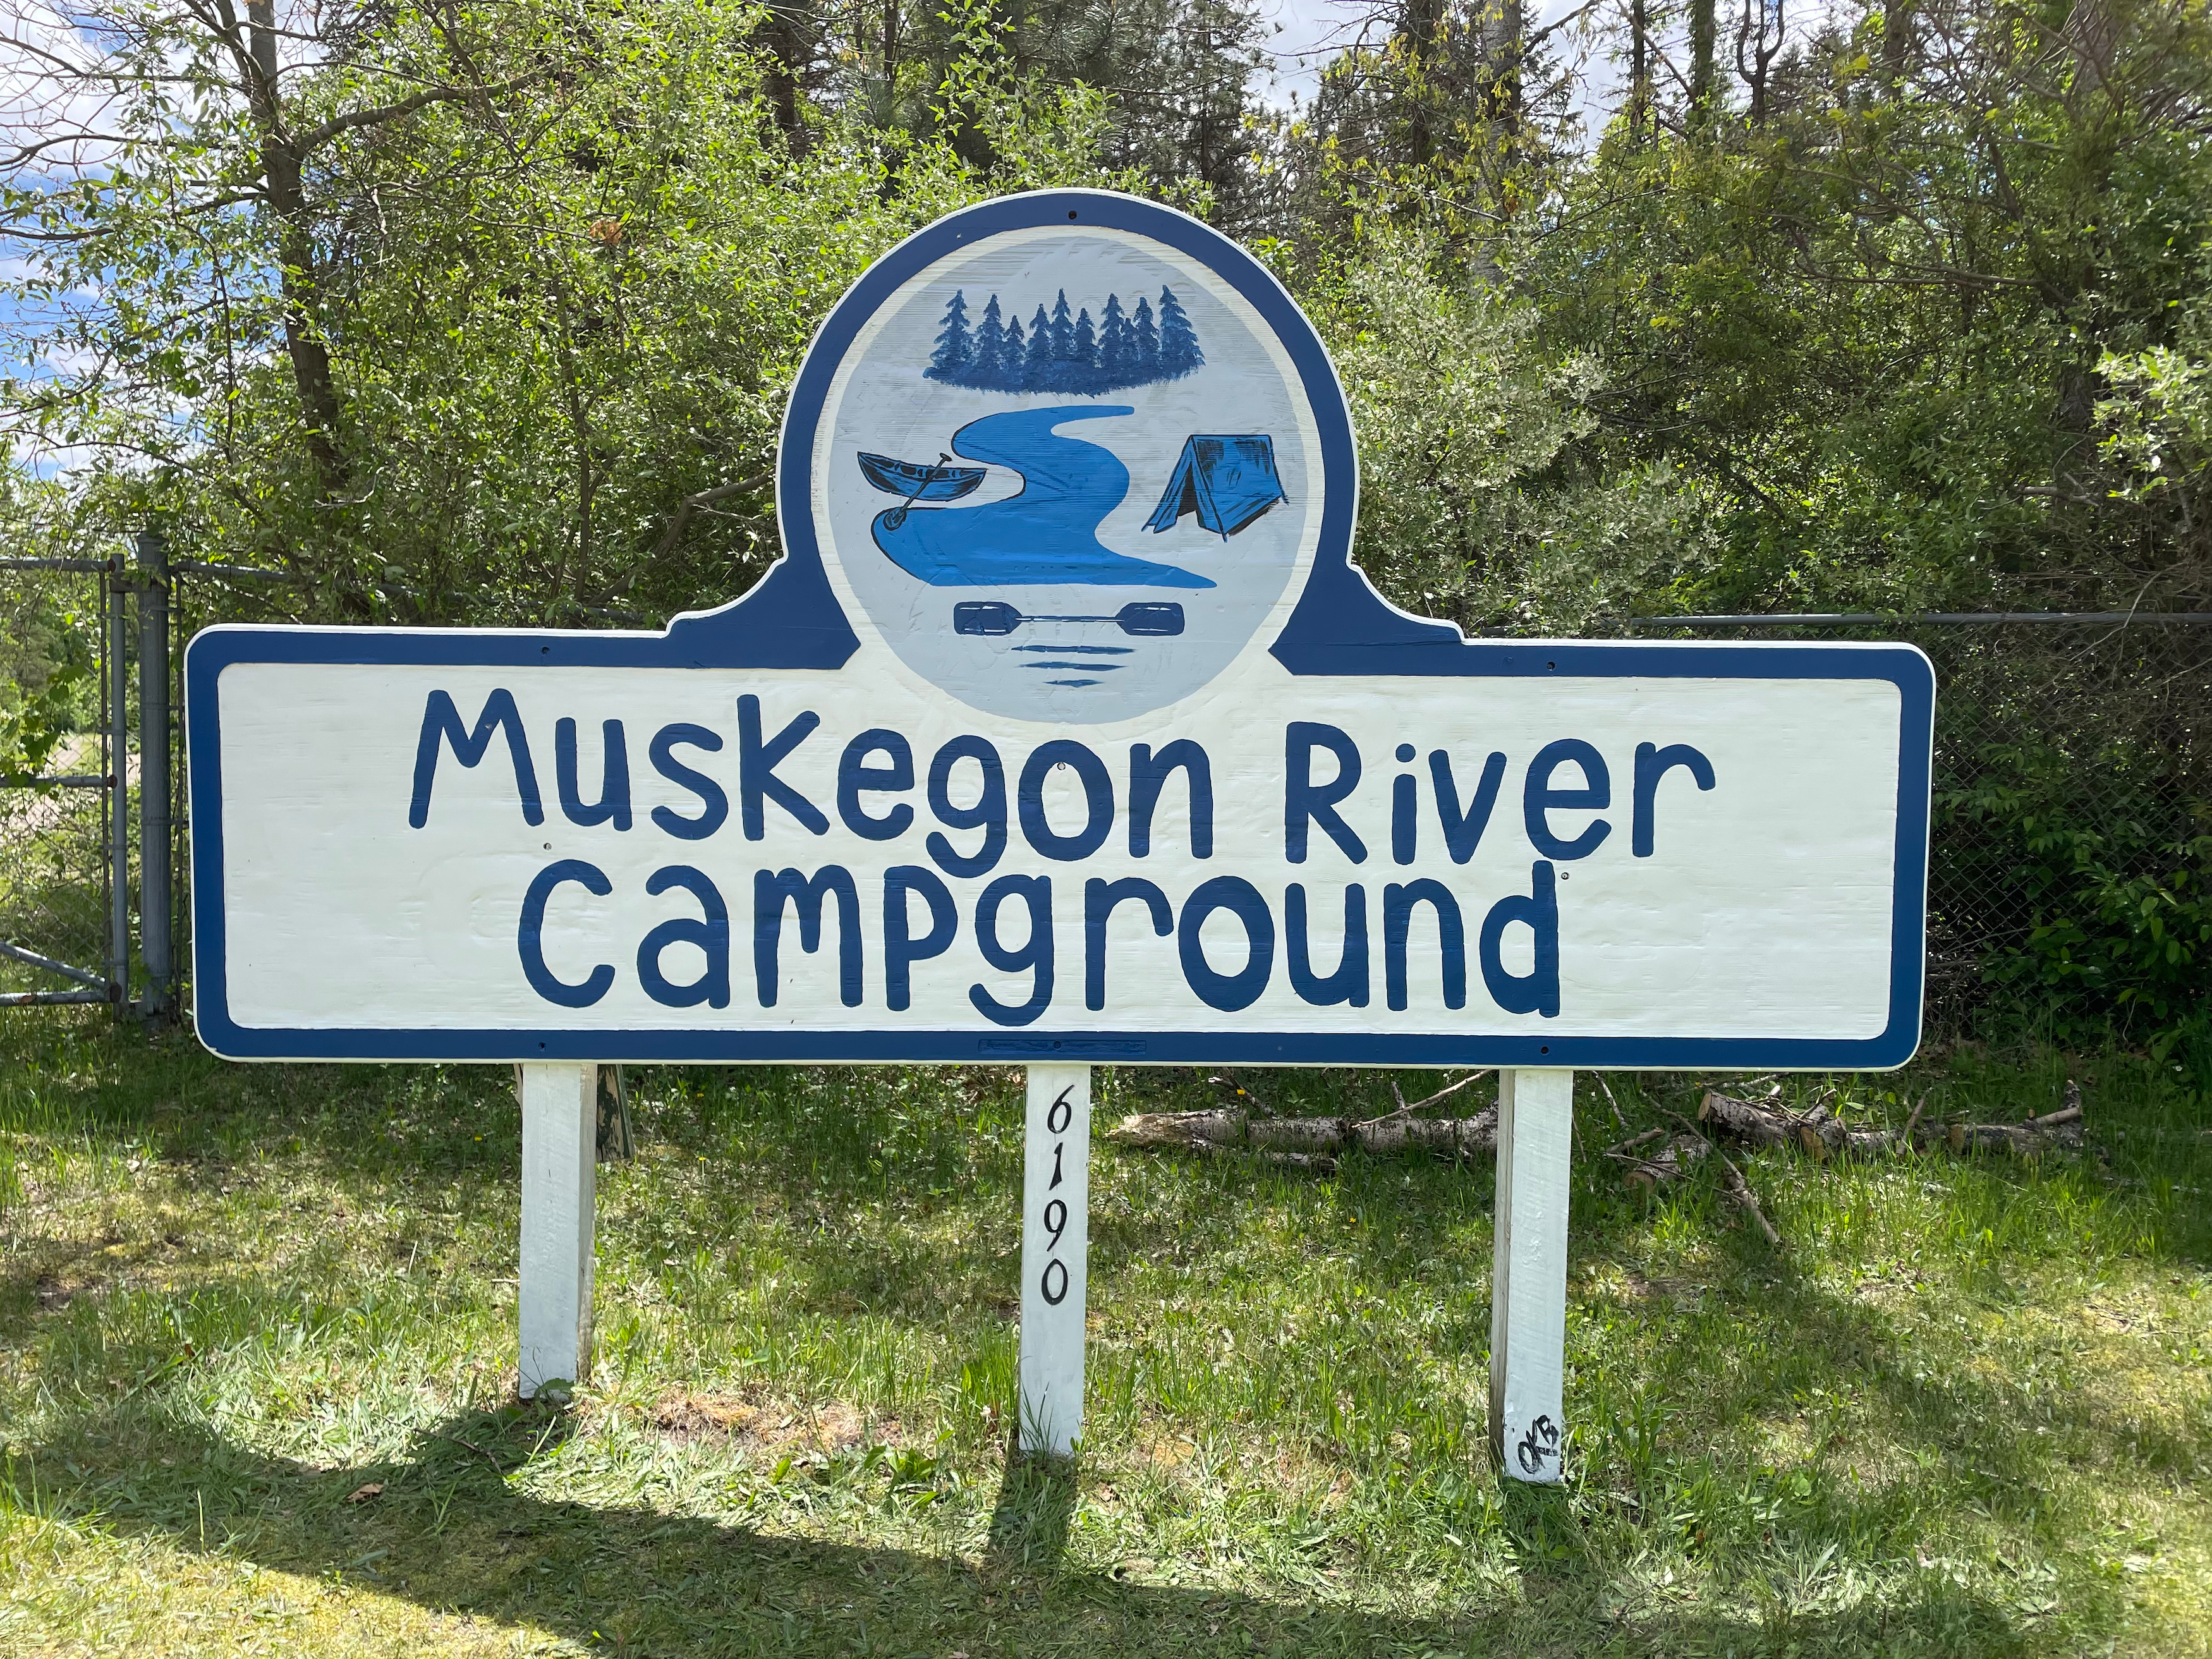 Camper submitted image from Muskegon River Campground - 1